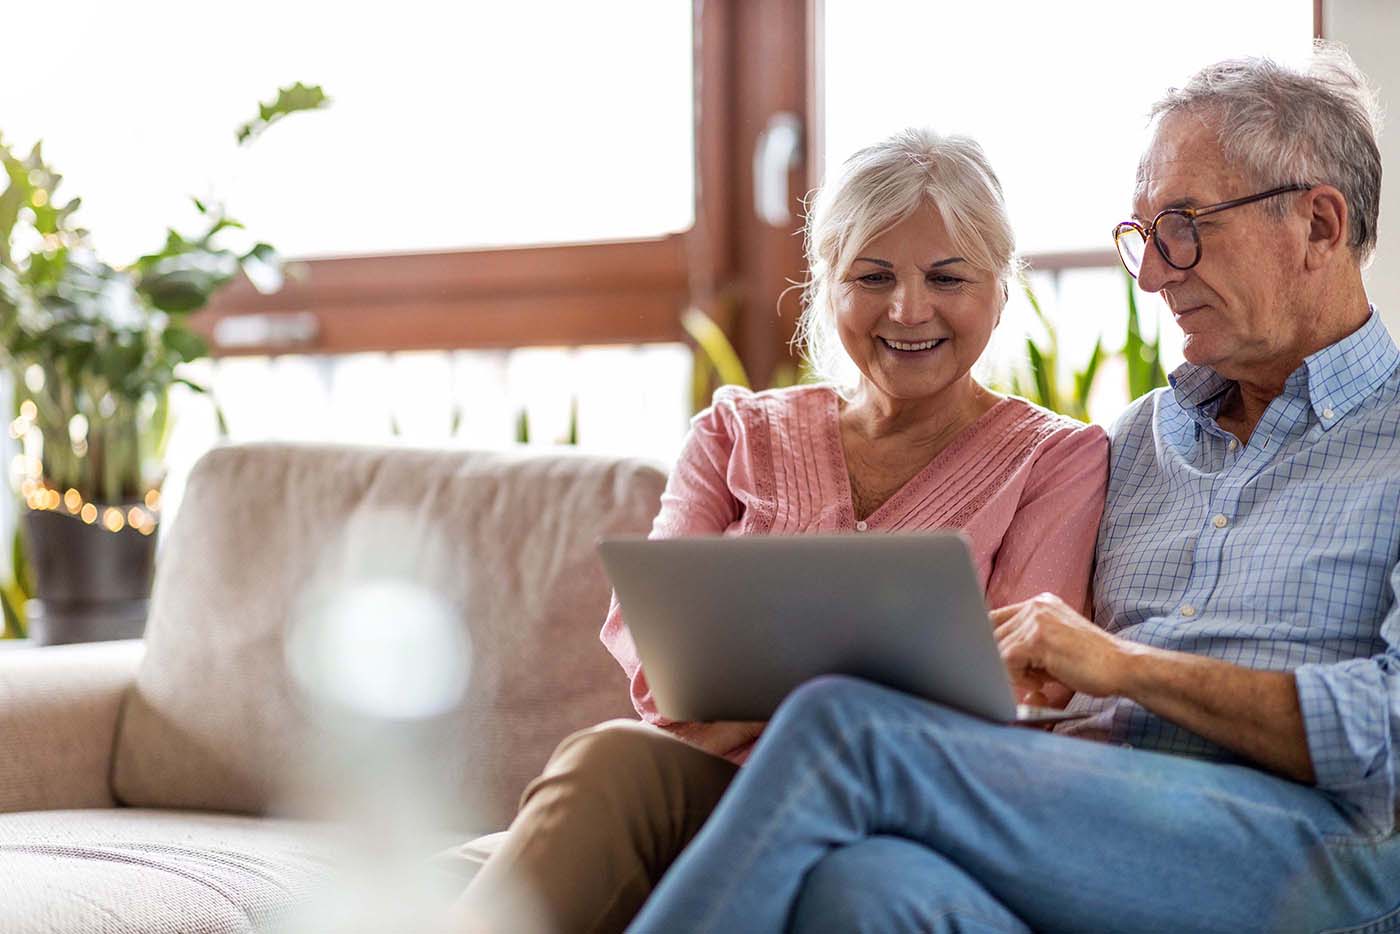 Older couple sitting comfortably on their couch, browsing website on a shared laptop